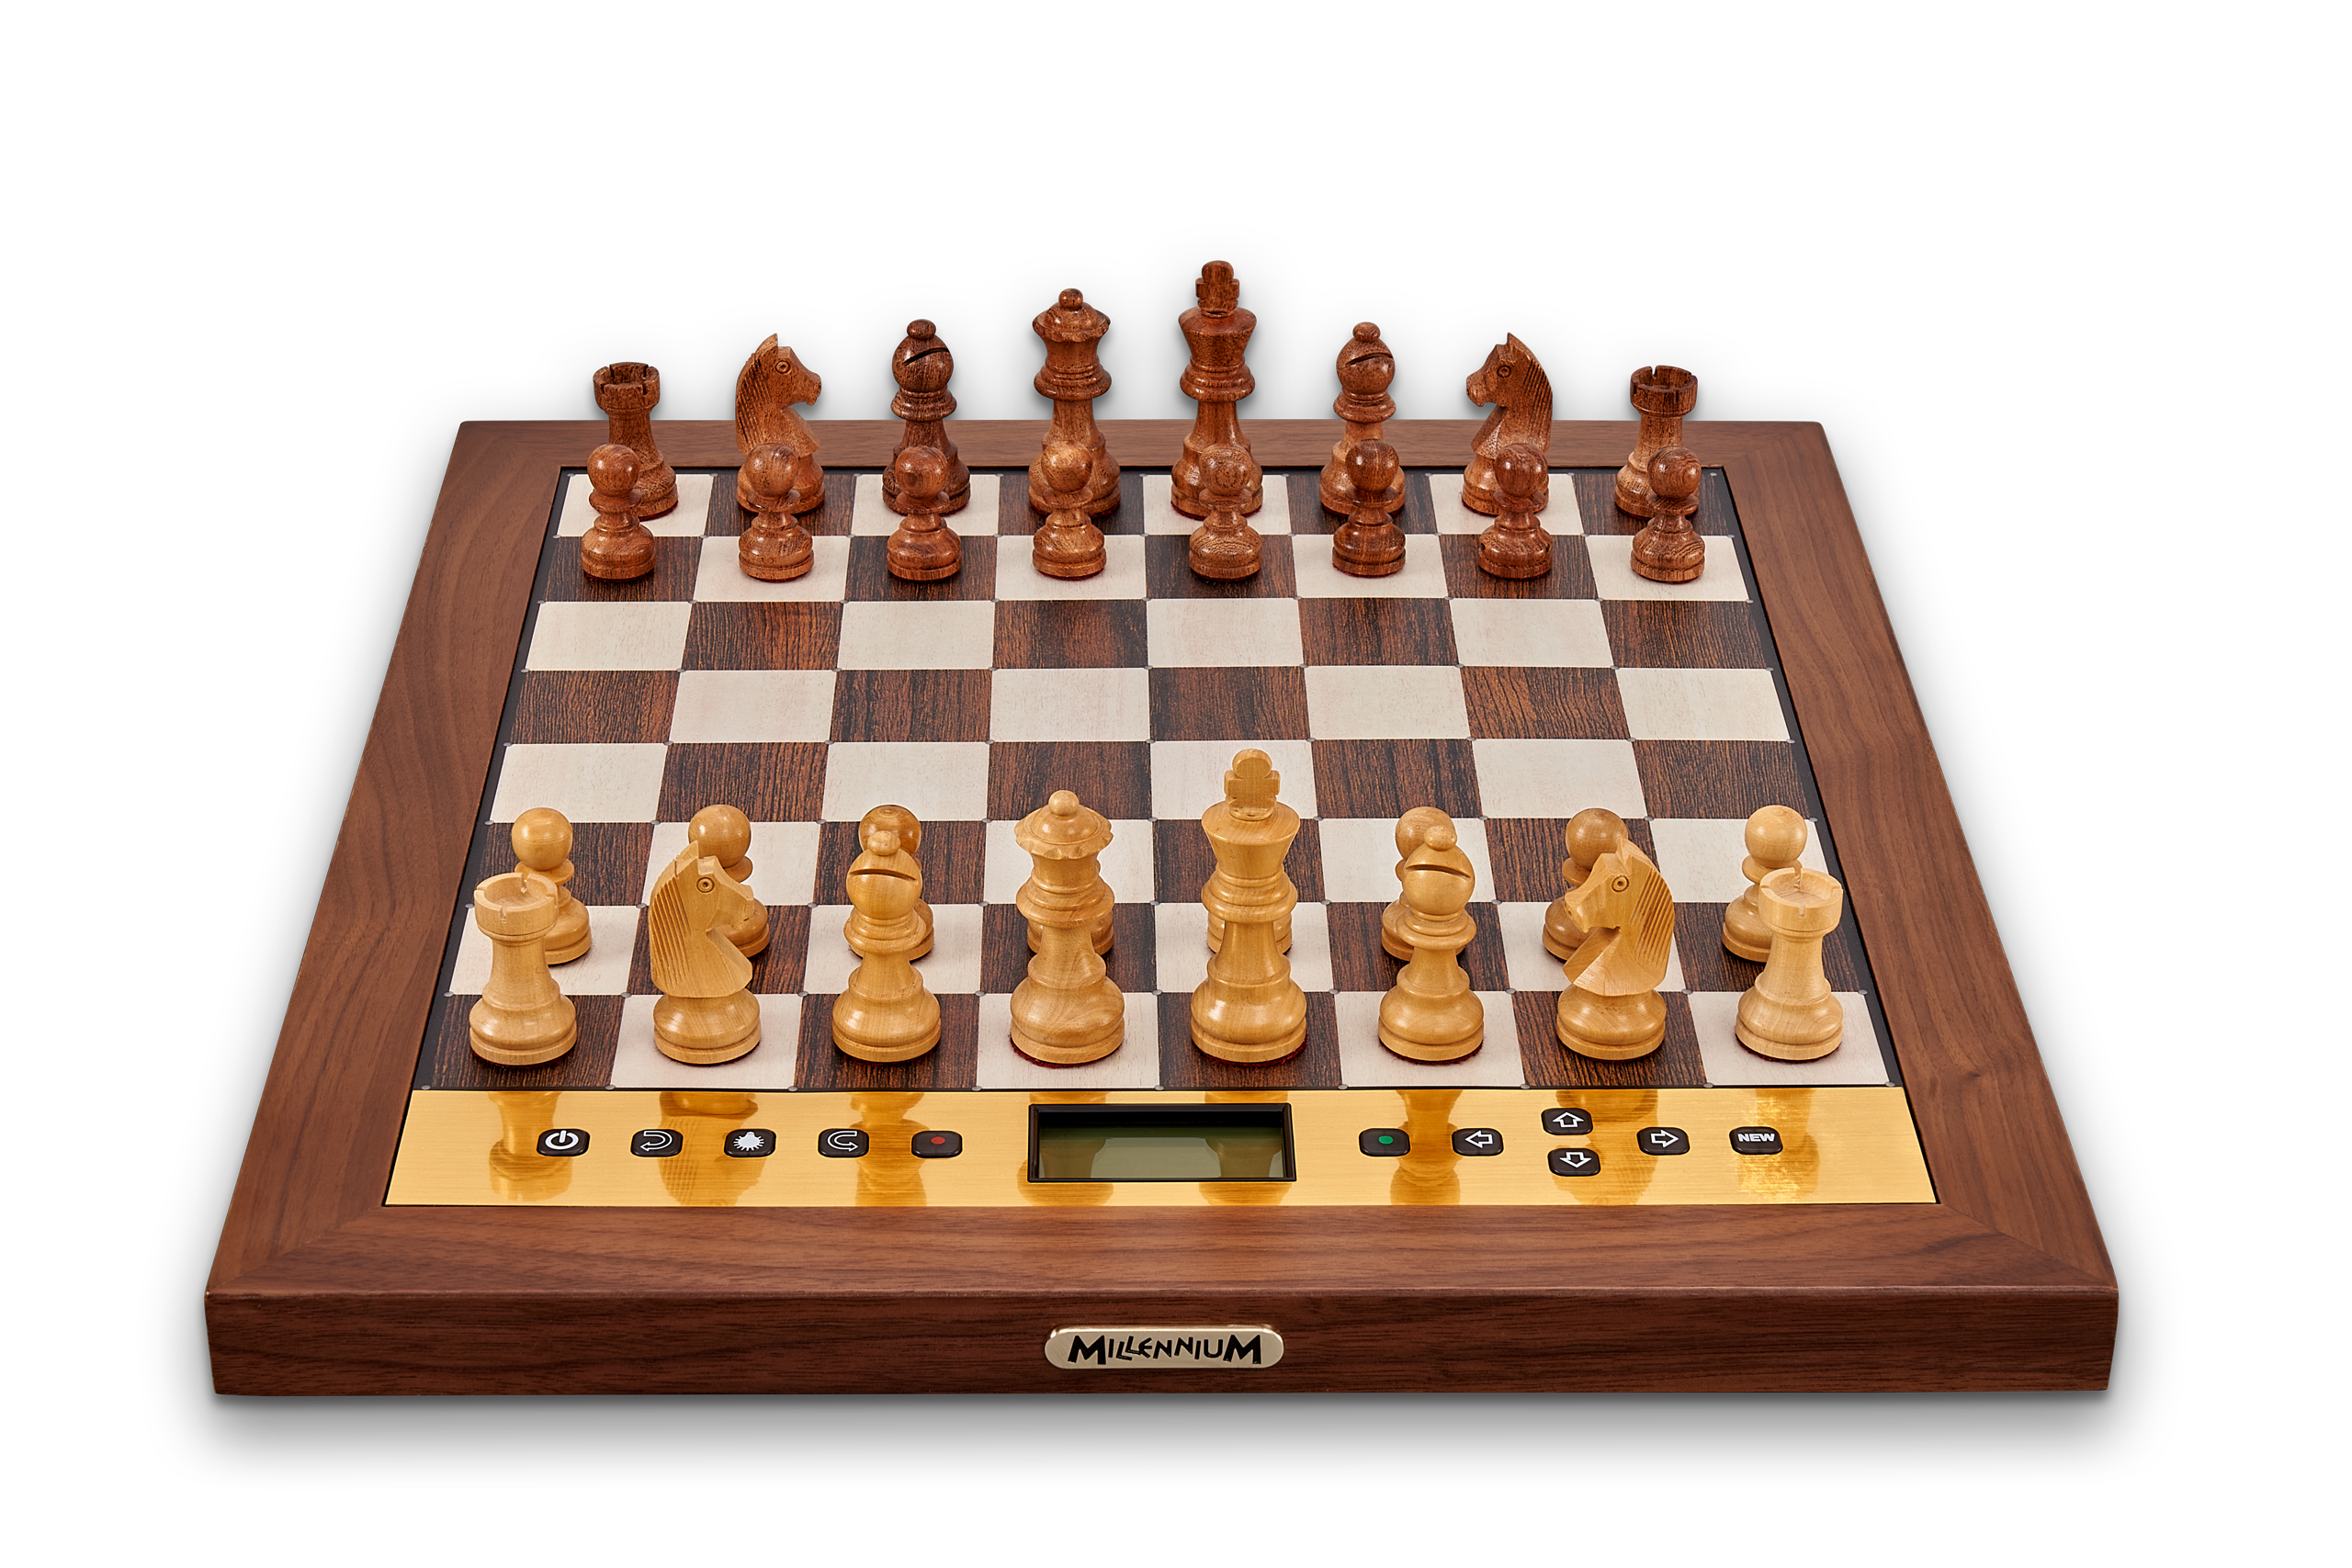 The King Performance Chess Computer